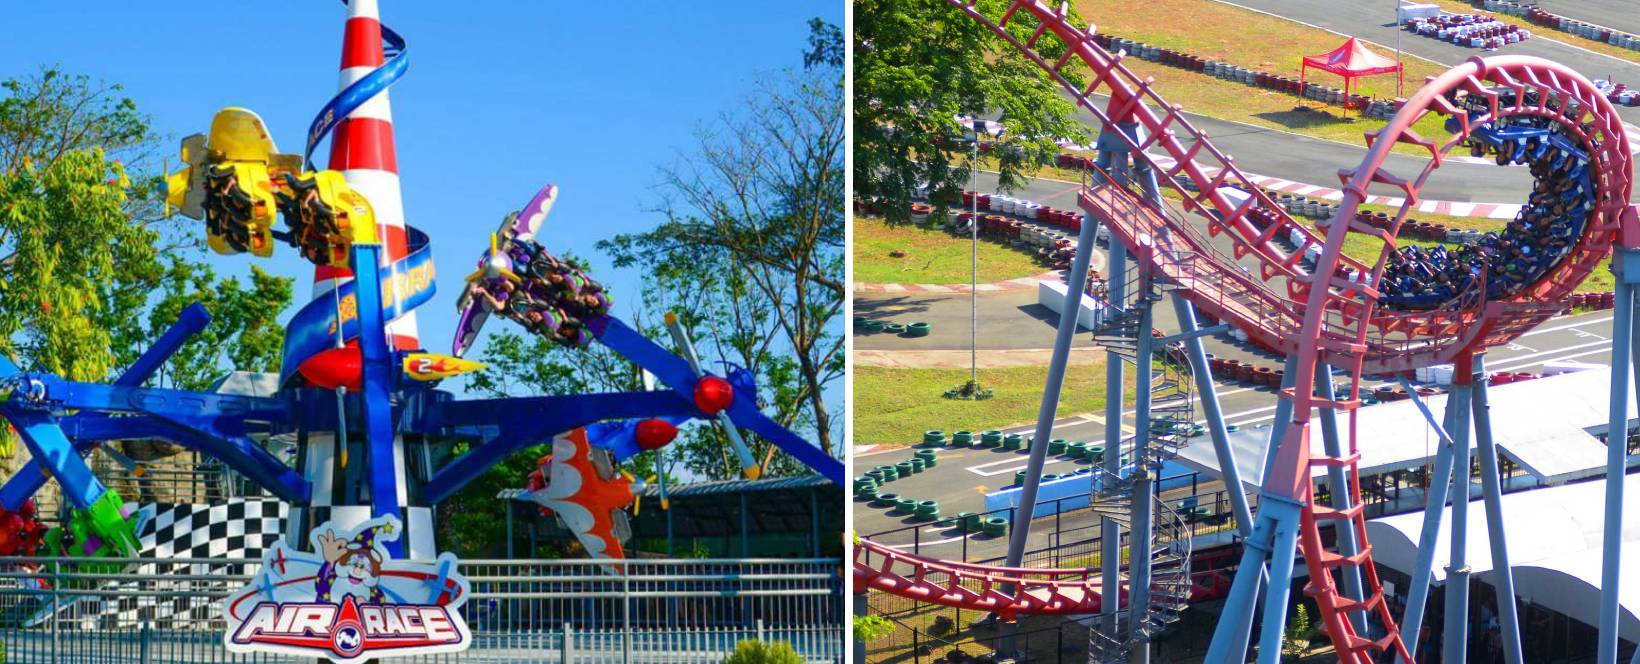 Enchanted Kingdom - air race and space shuttle